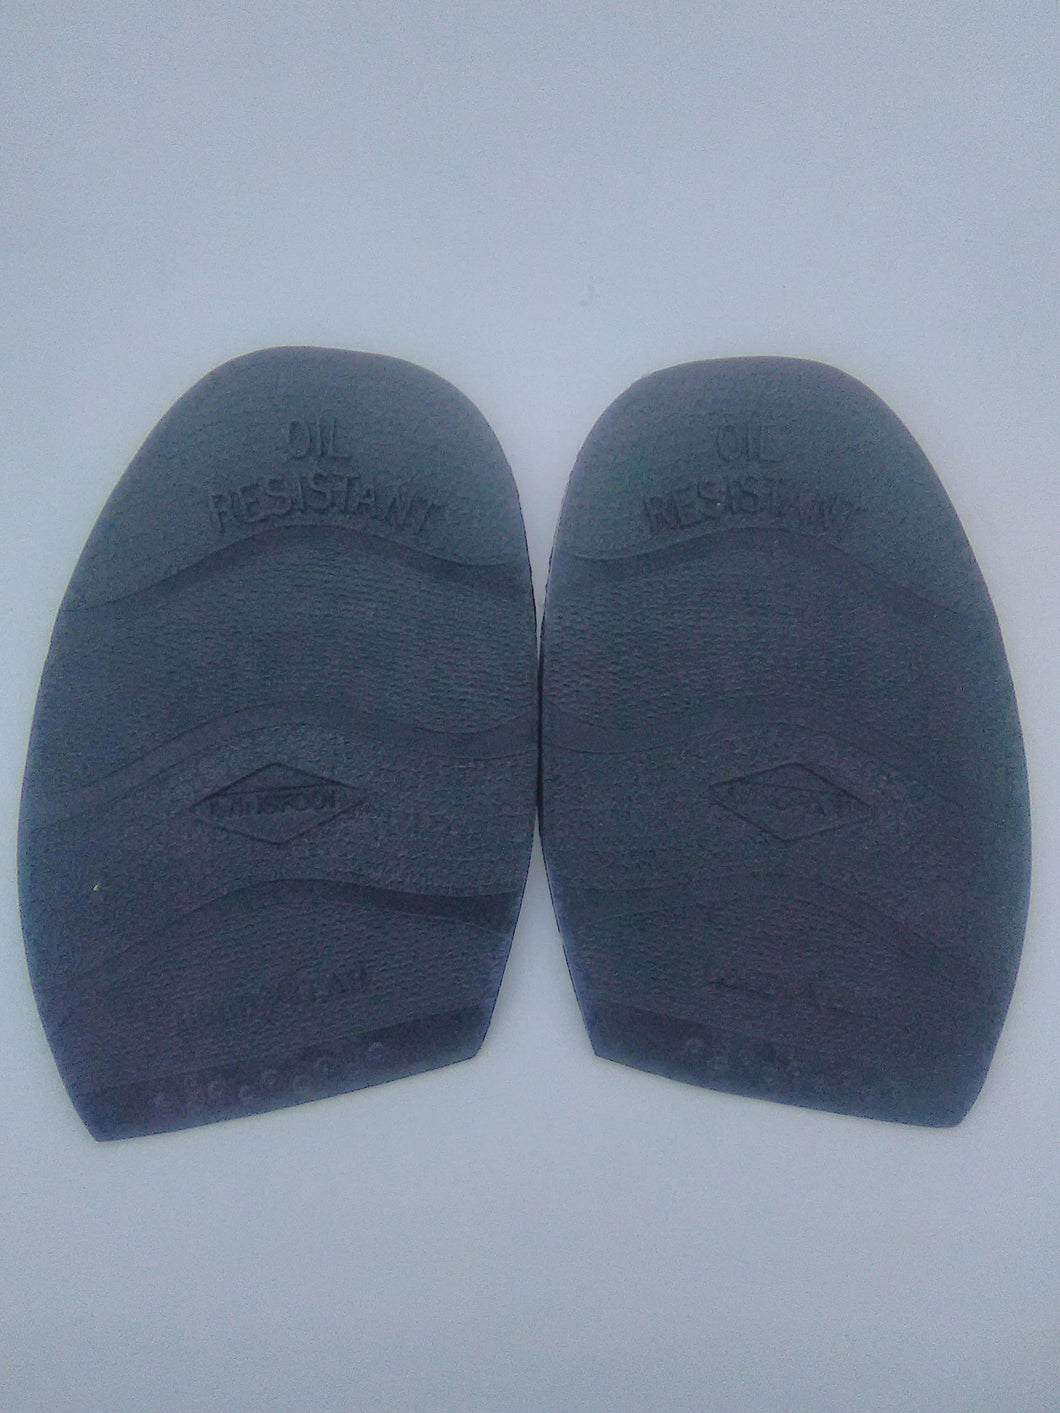 Goodyear Soles Size 9 - 11